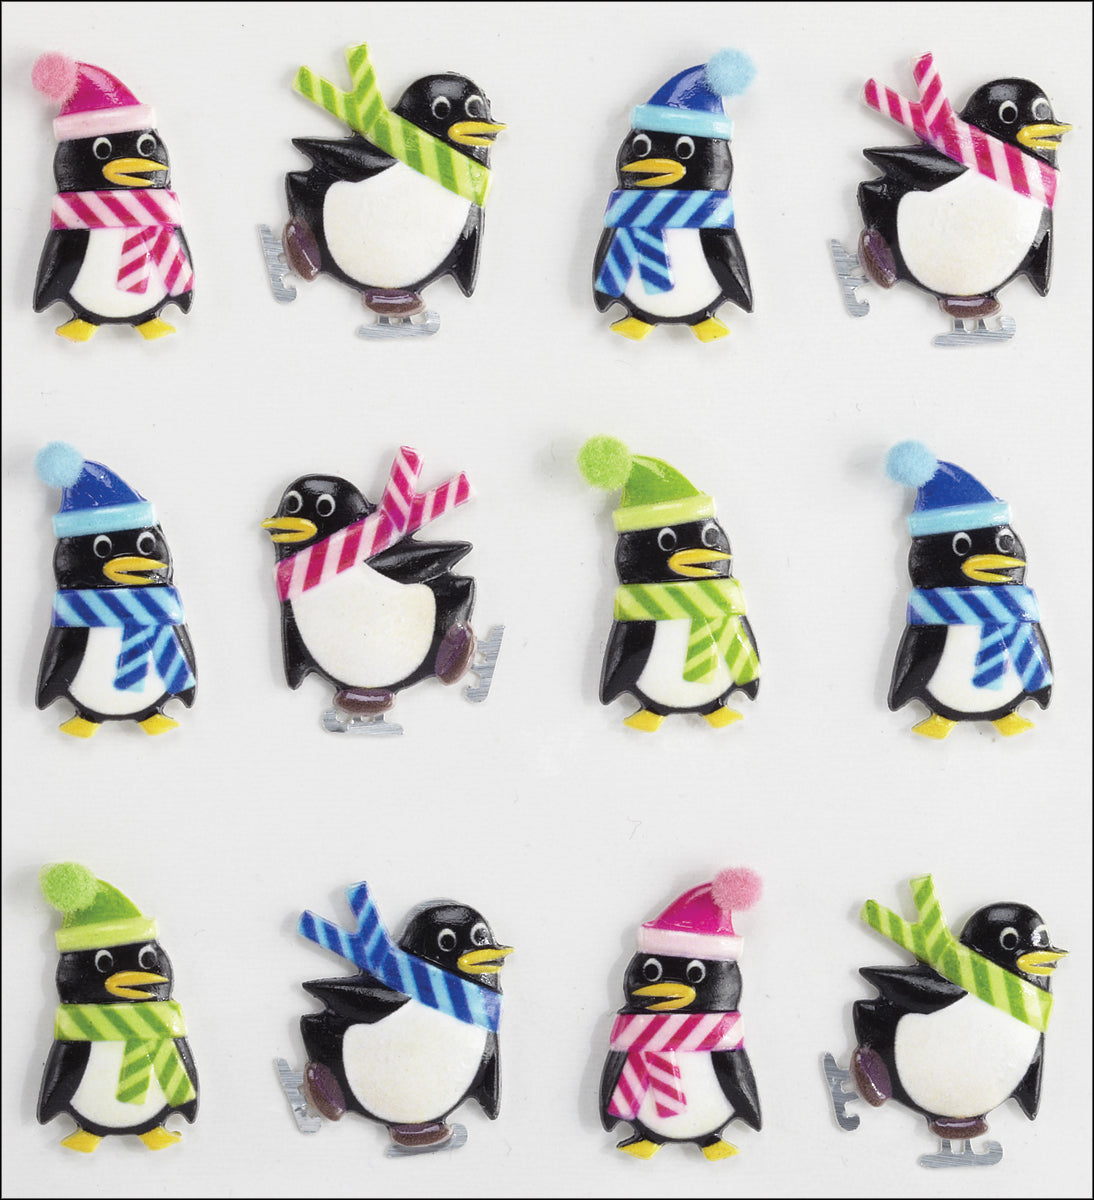 Jolee's Cabochon Dimensional Repeat Stickers-Holiday Penguins